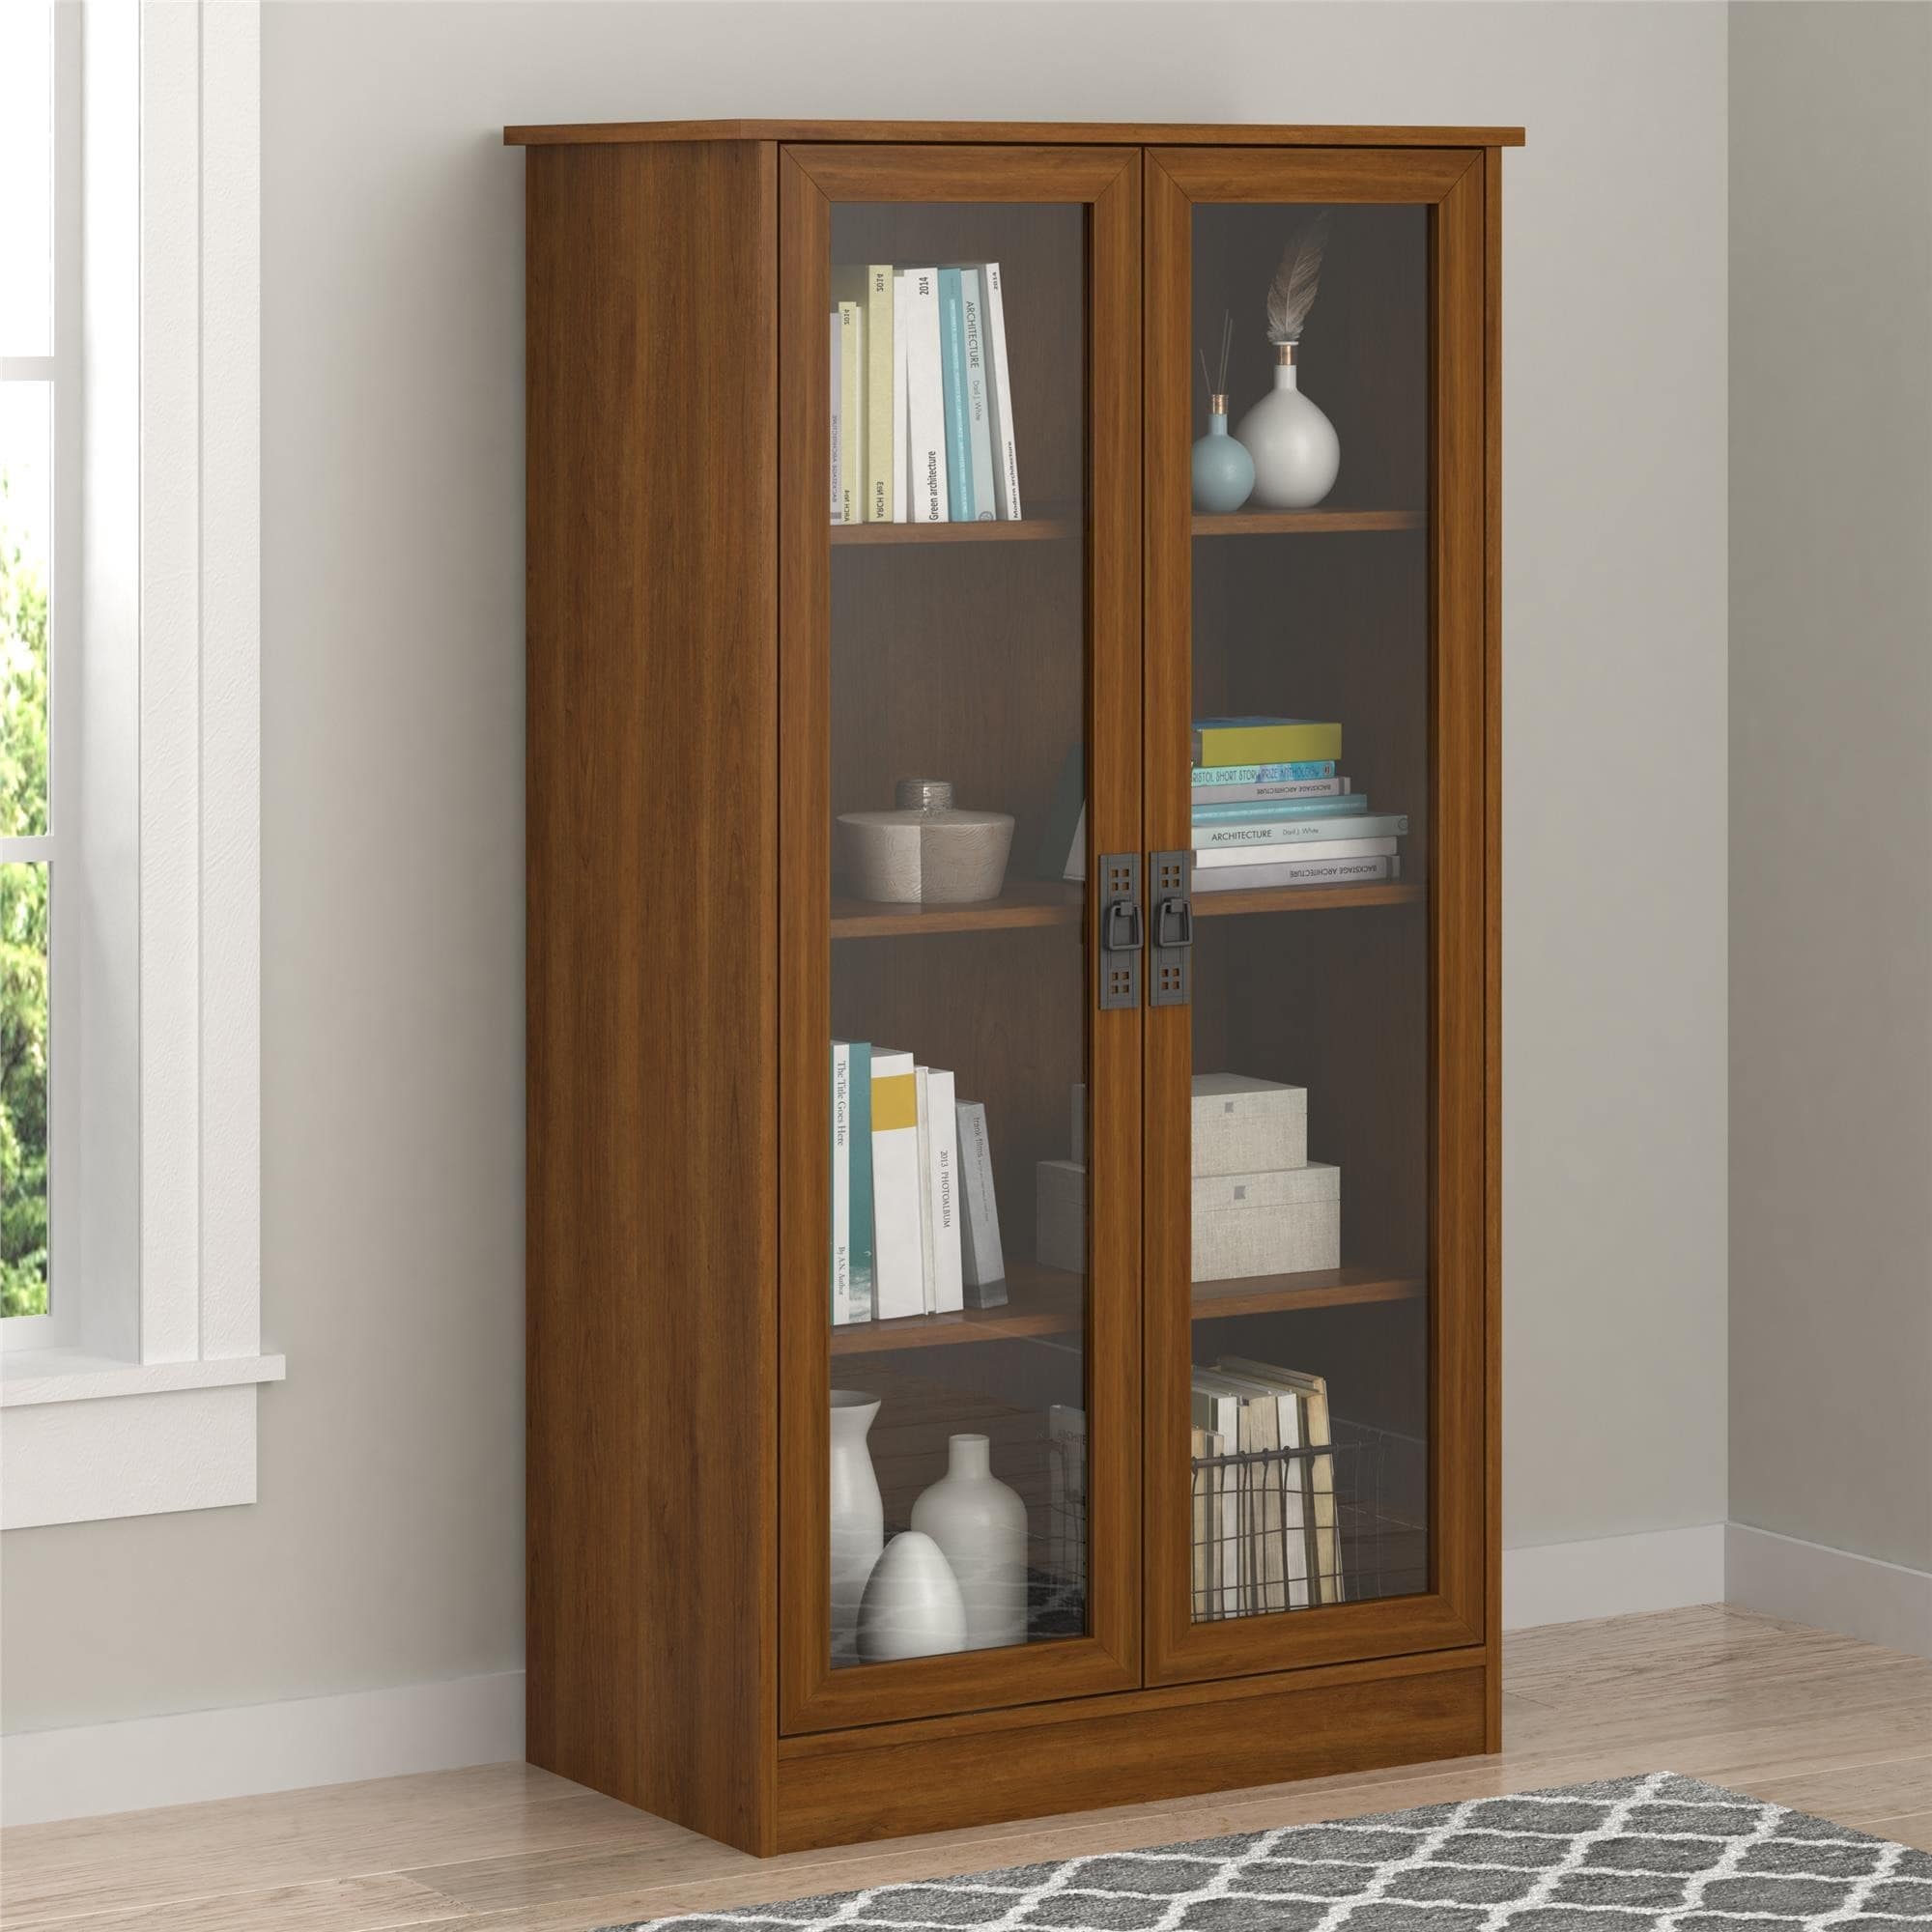 cherry glass door bookcase compare $ 203 50 today $ 180 99 save 11 % 2